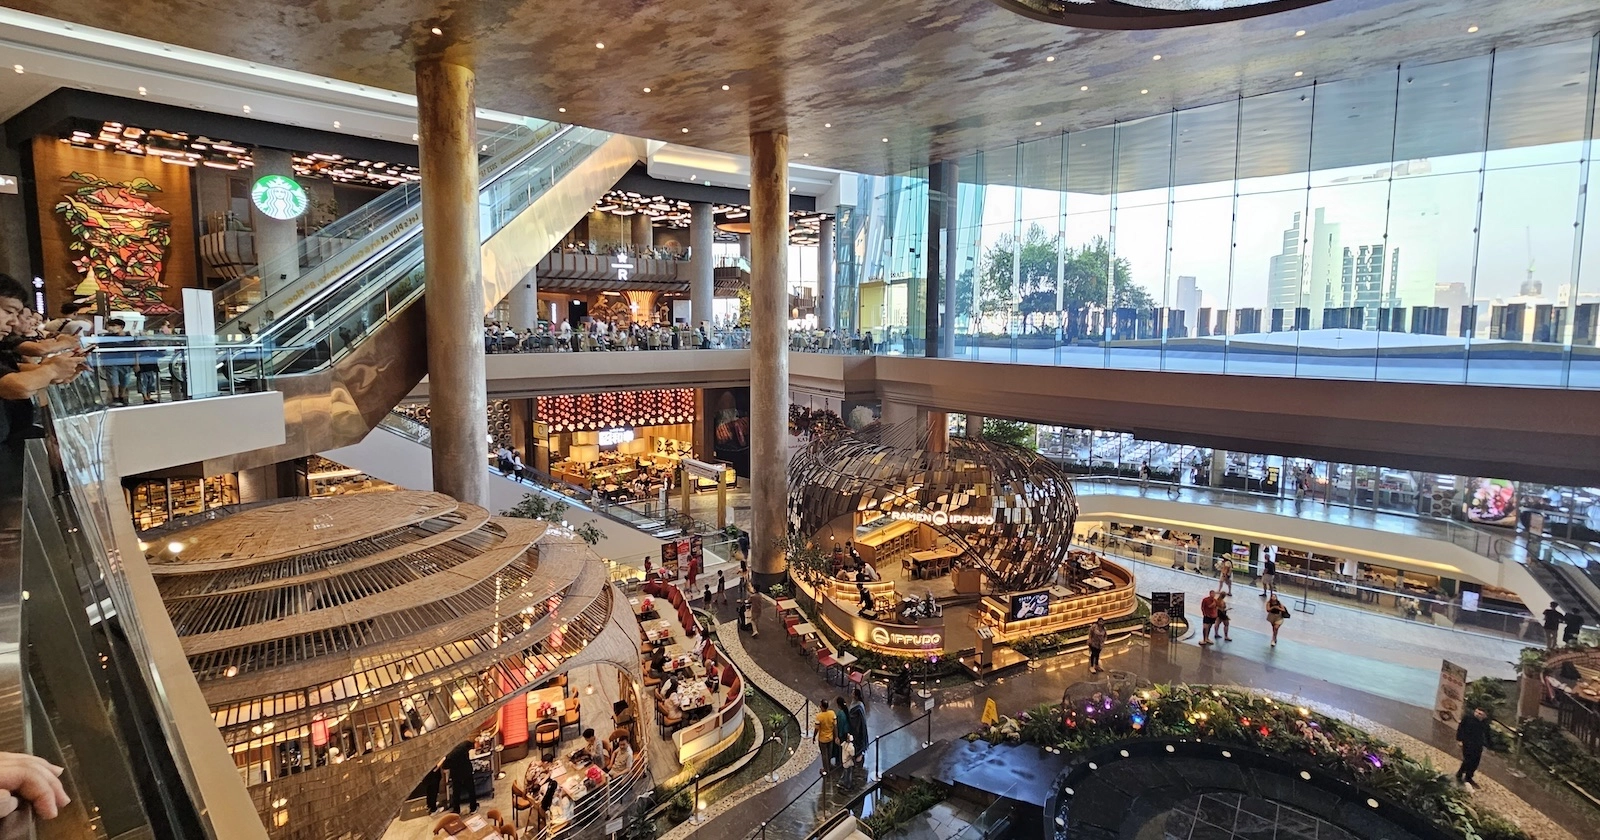 extravagant interior of a luxury shopping mall in Bangkok